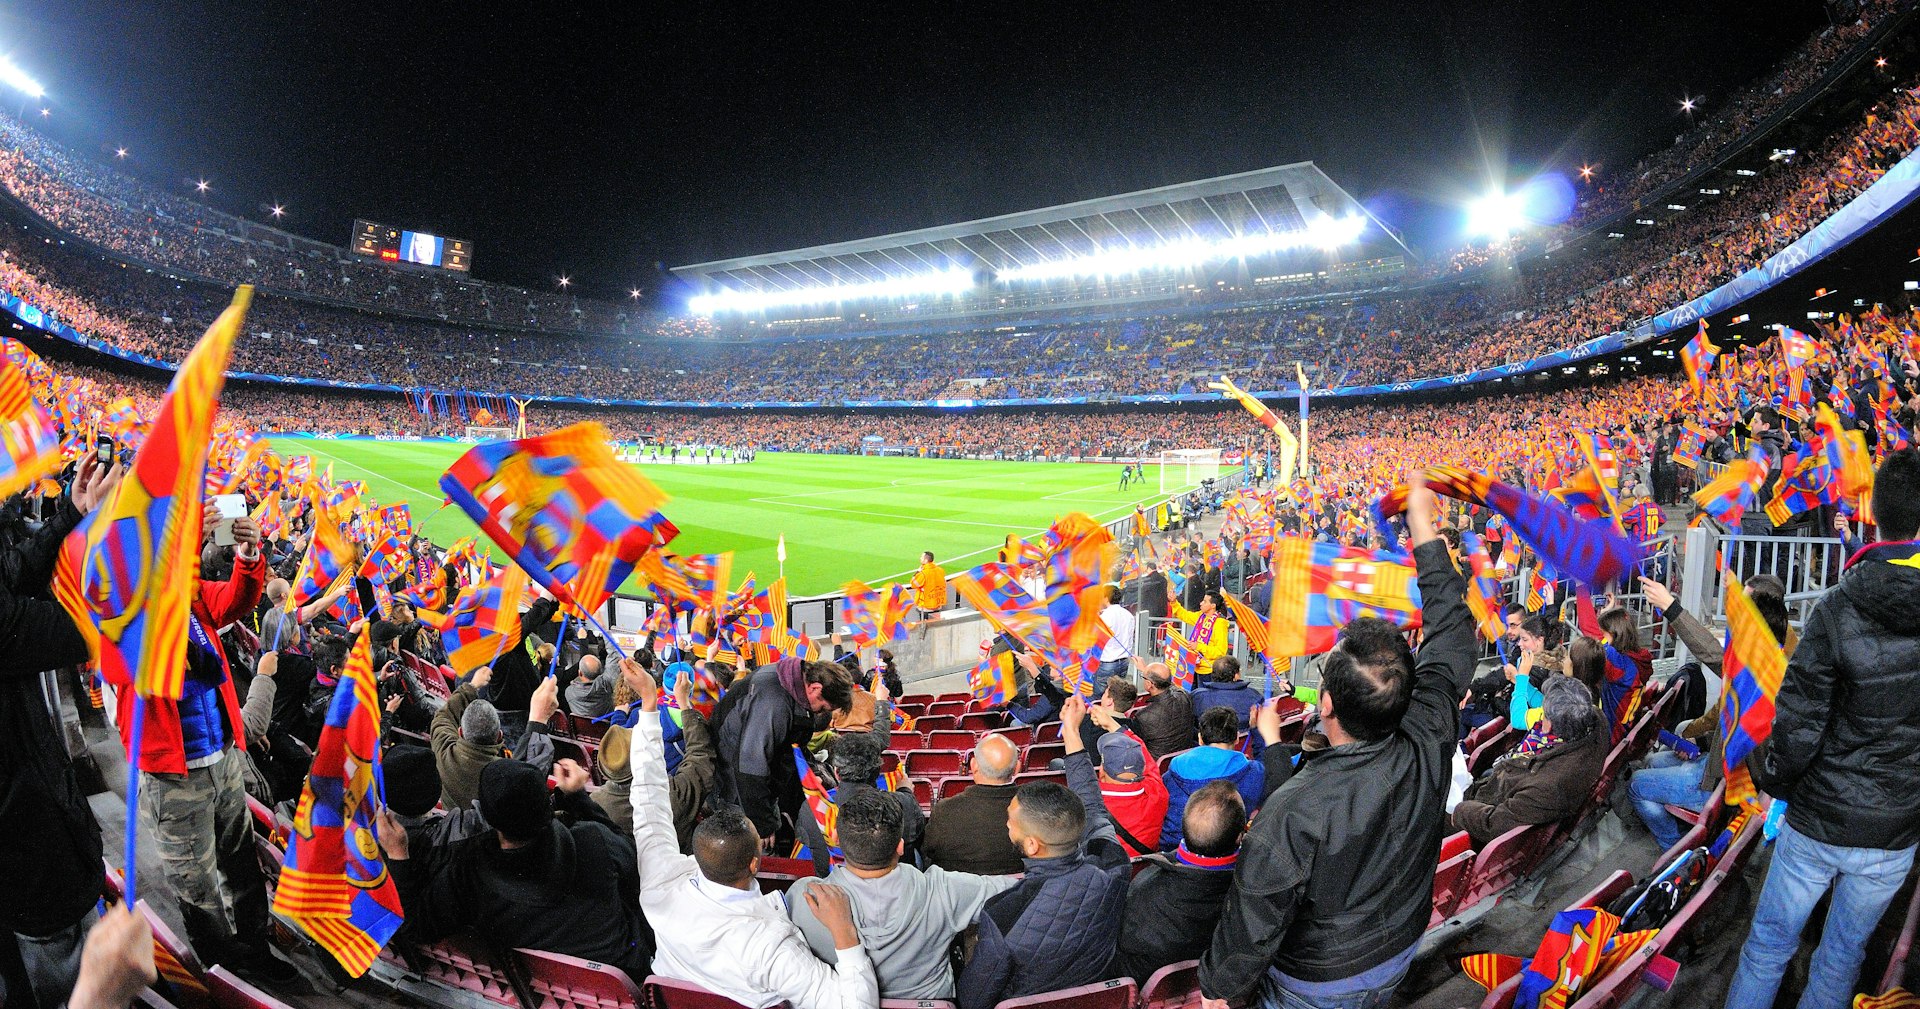 Soccer fans watch a game between Futbol Club Barcelona and Manchester City at Camp Nou in Barcelona